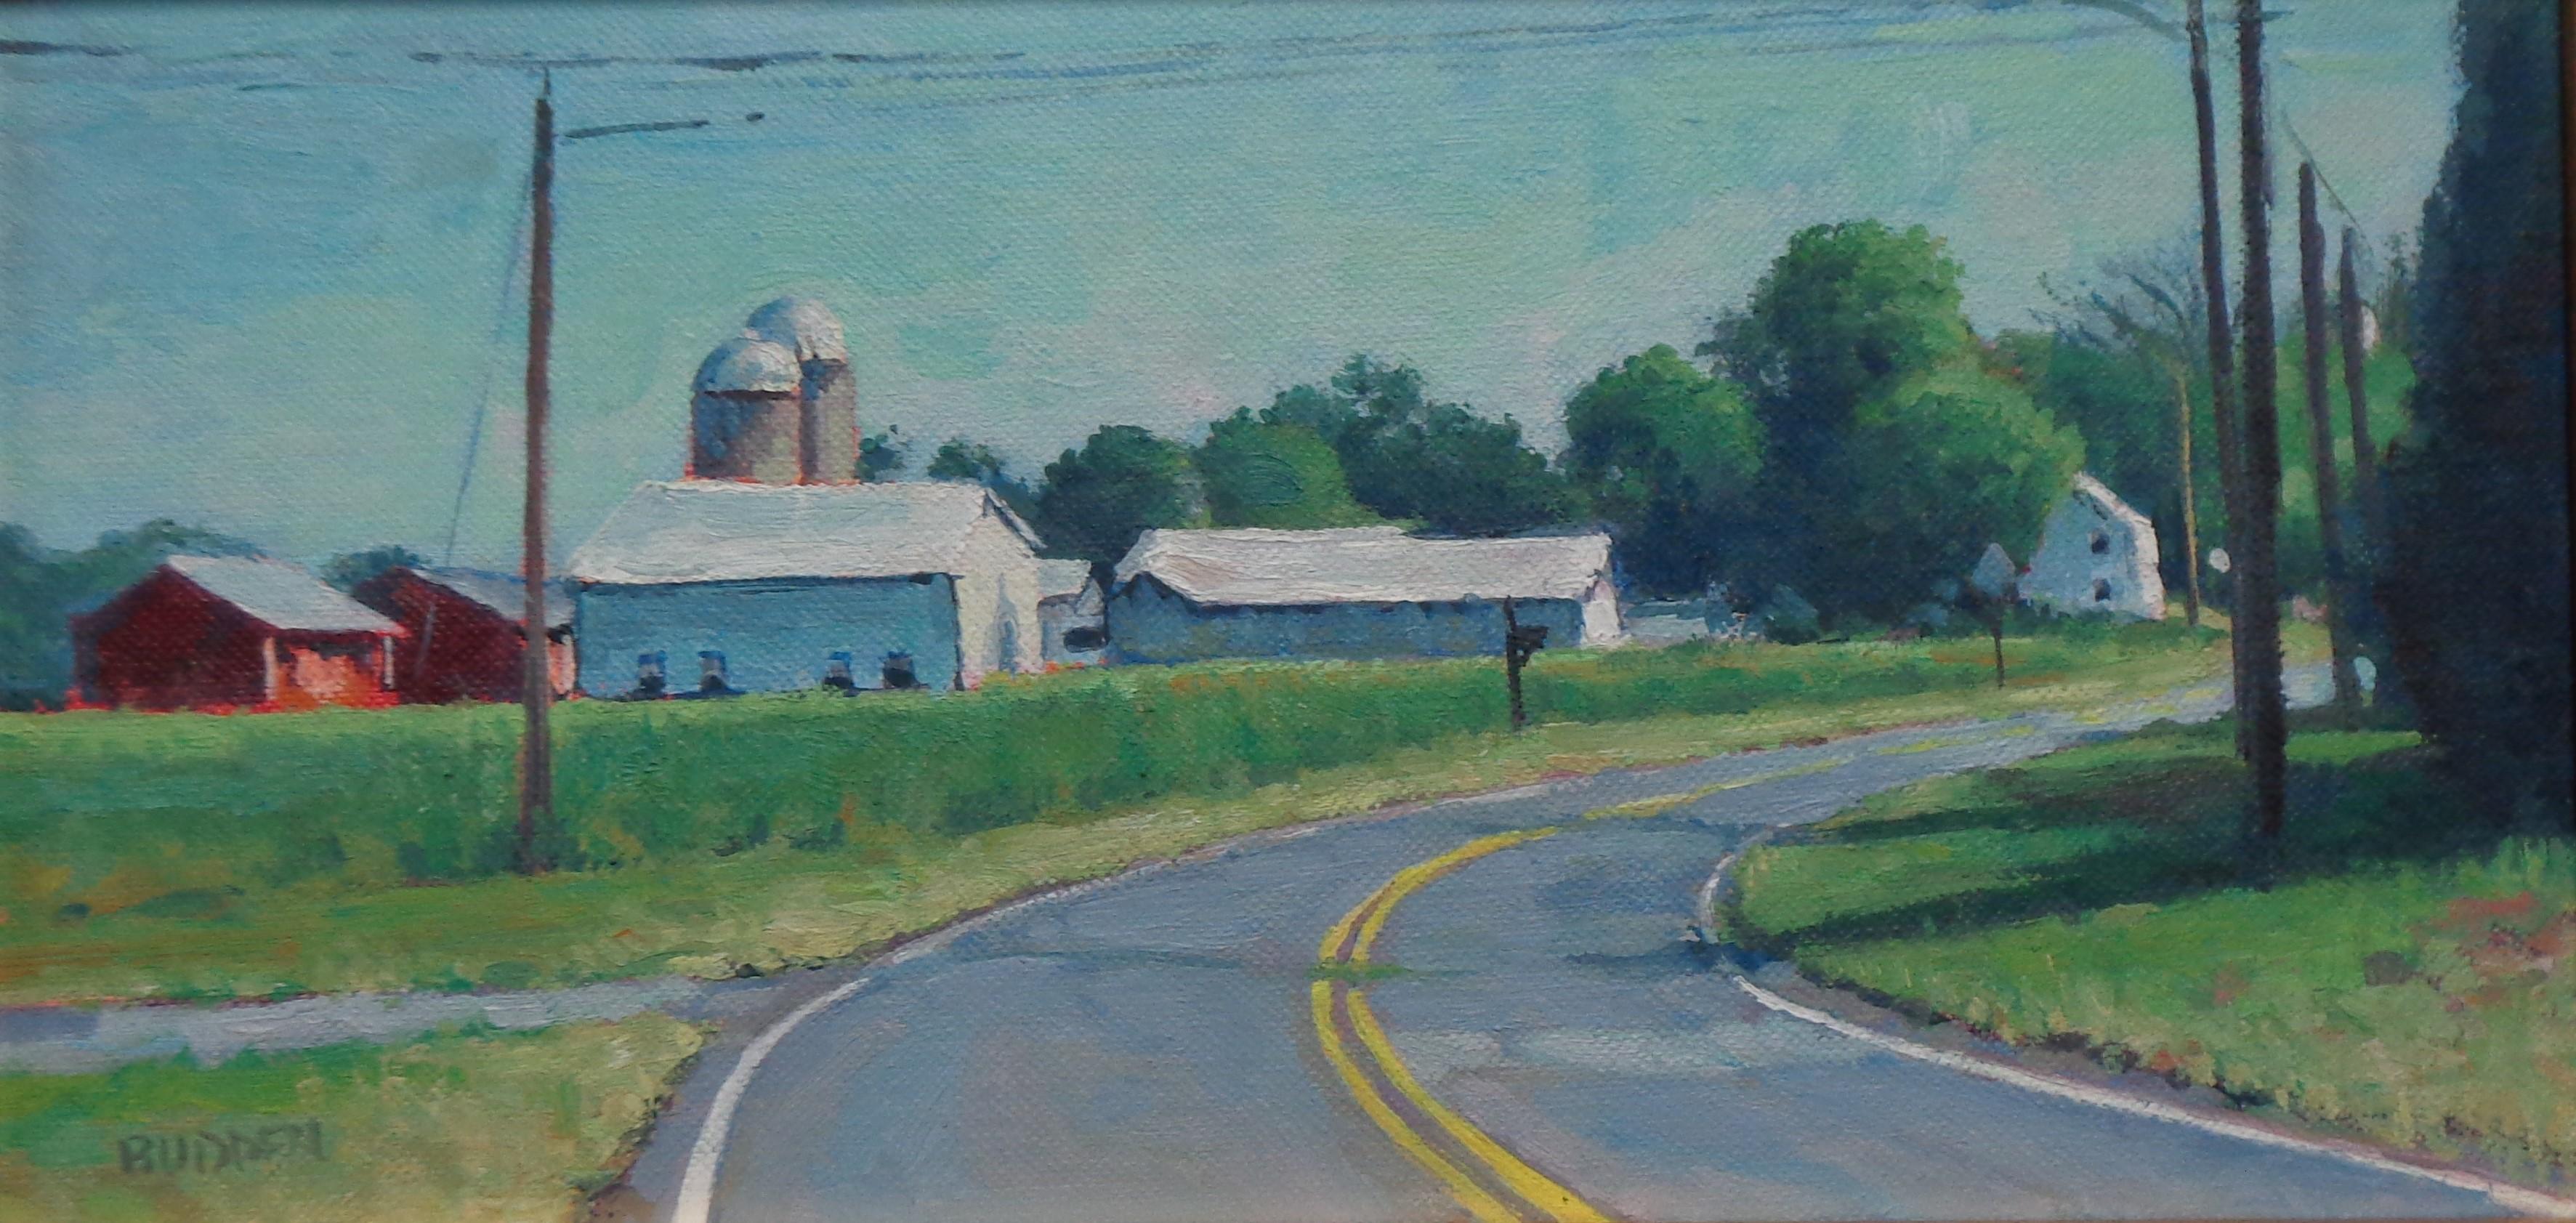  Farm Rural Road Landscape Oil Painting by Michael Budden For Sale 1